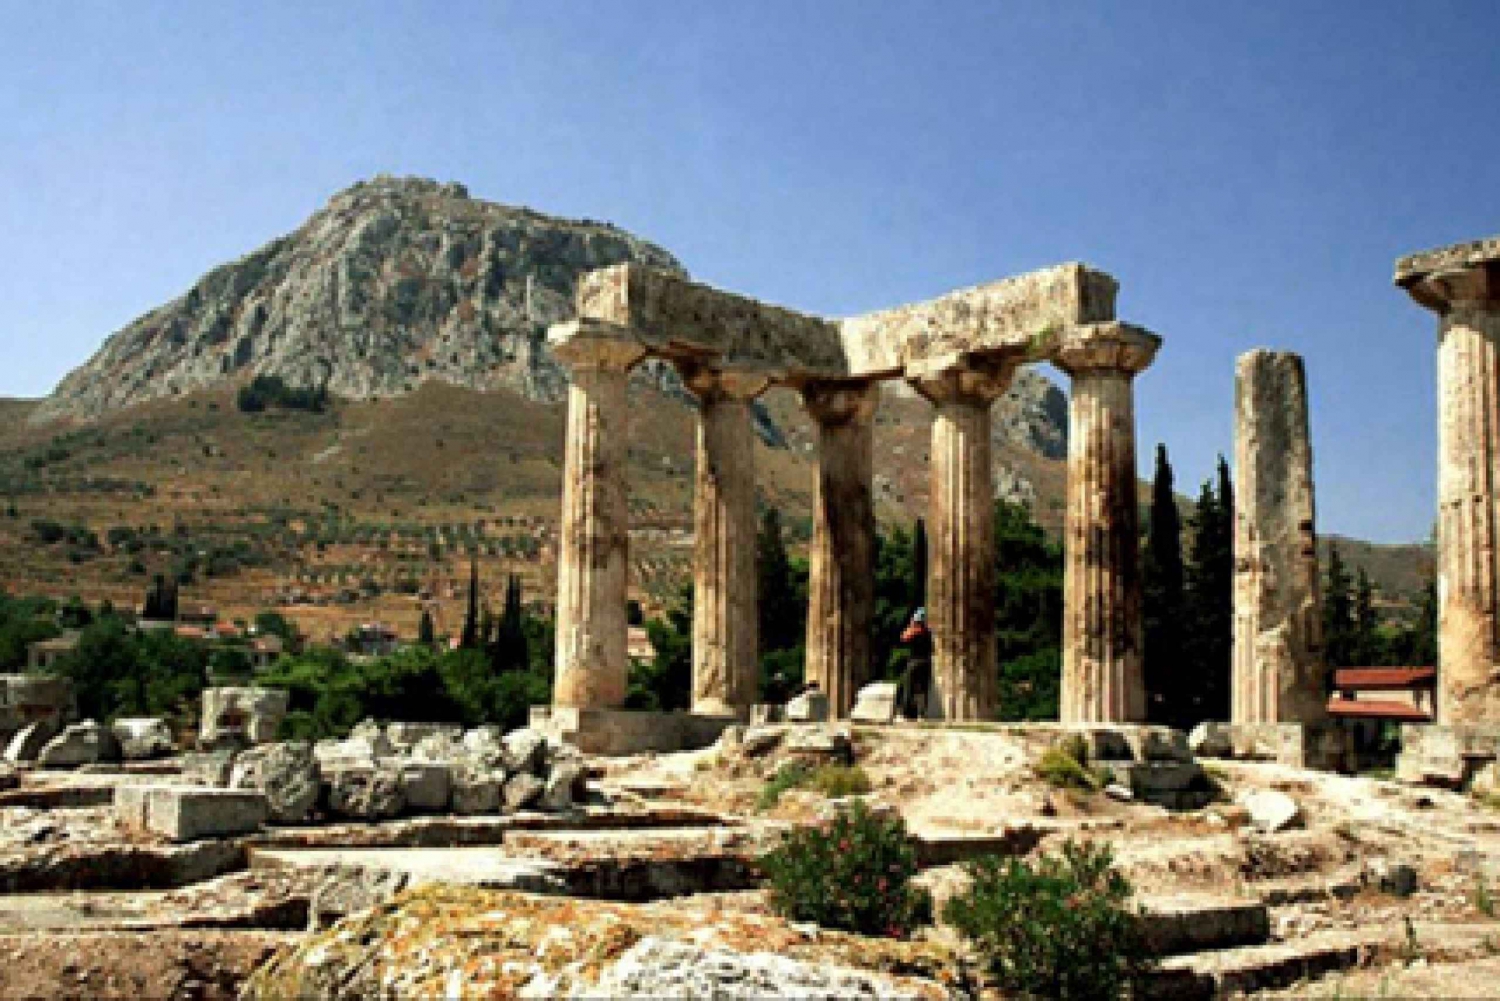 Corinth Half-Day Small Group Tour from Athens